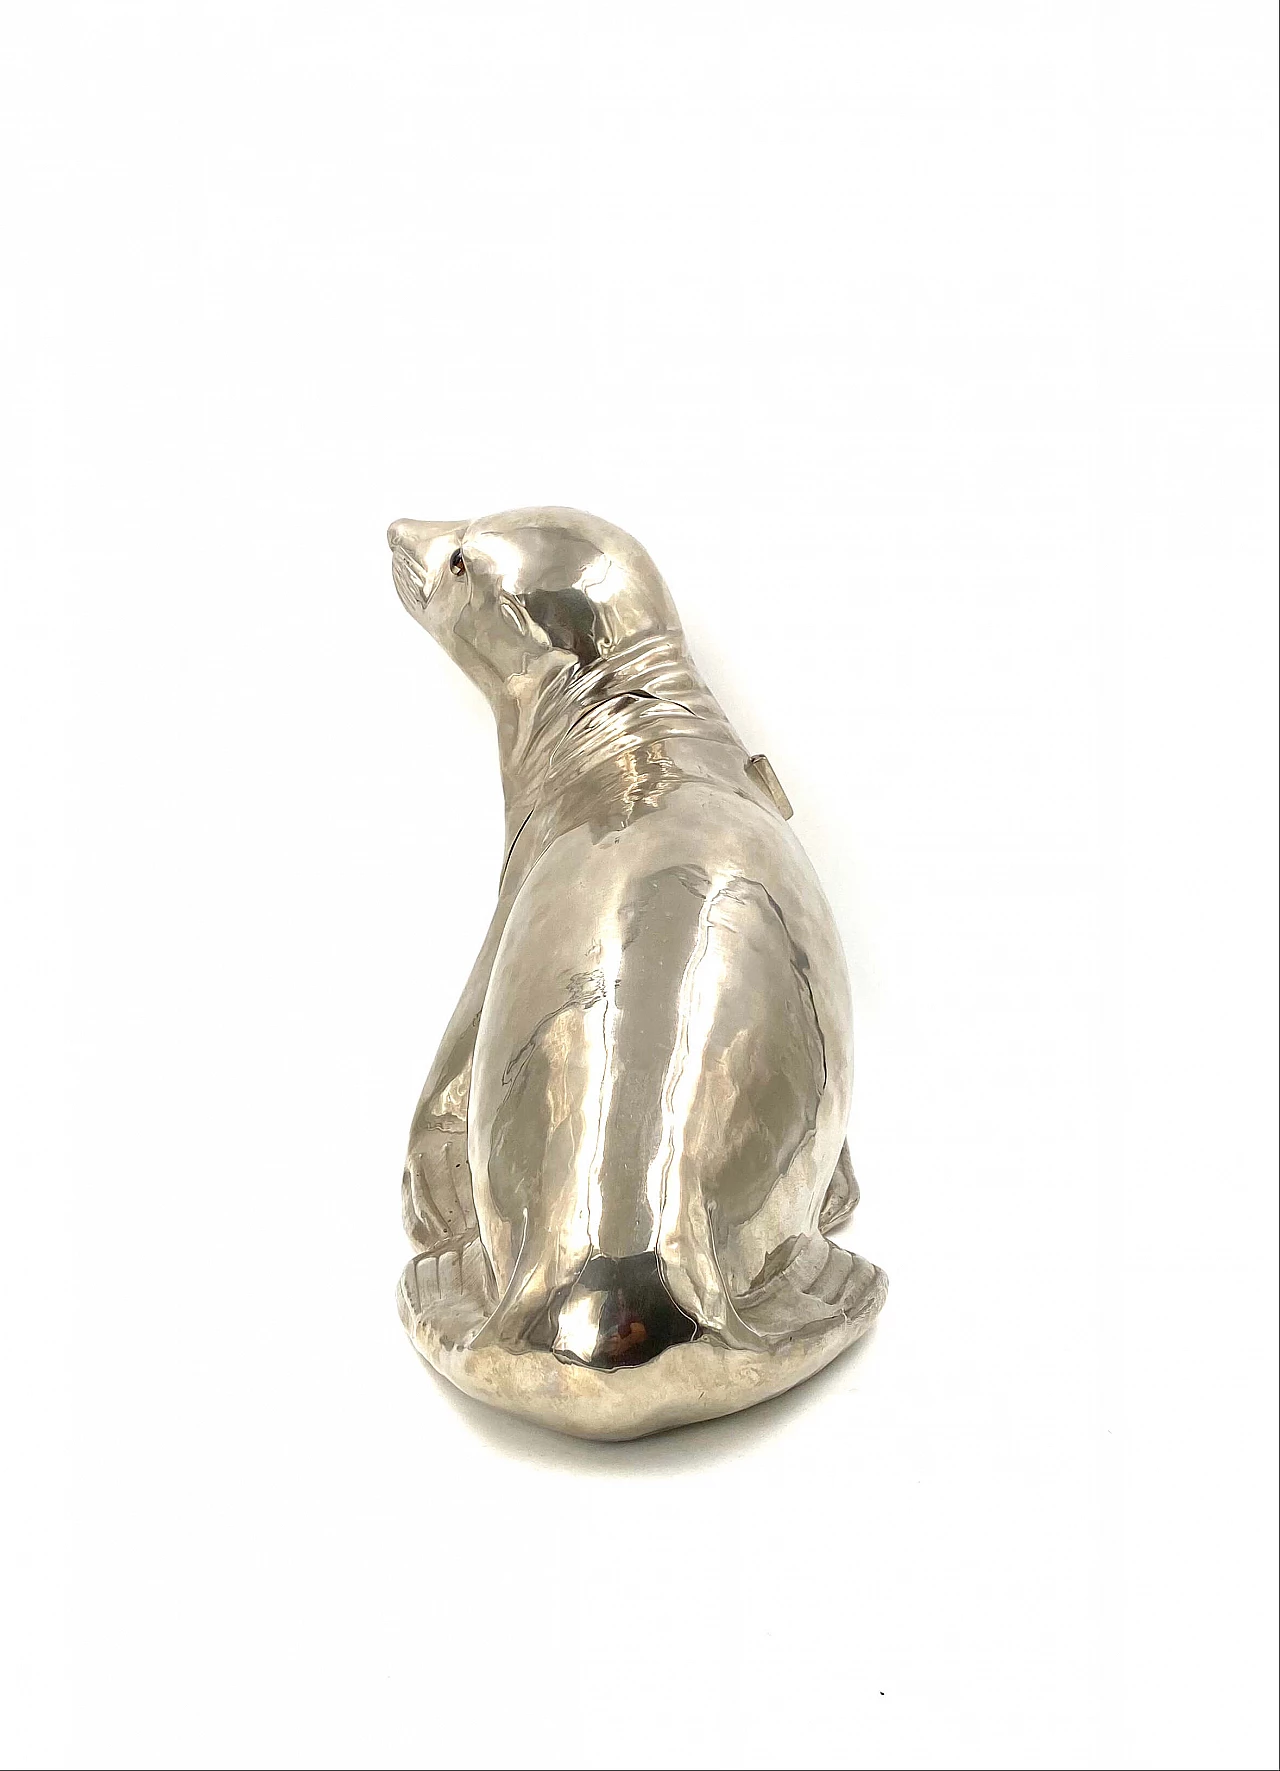 Seal-shaped ice bucket centrepiece by Franco Lapini, 70s 1273956